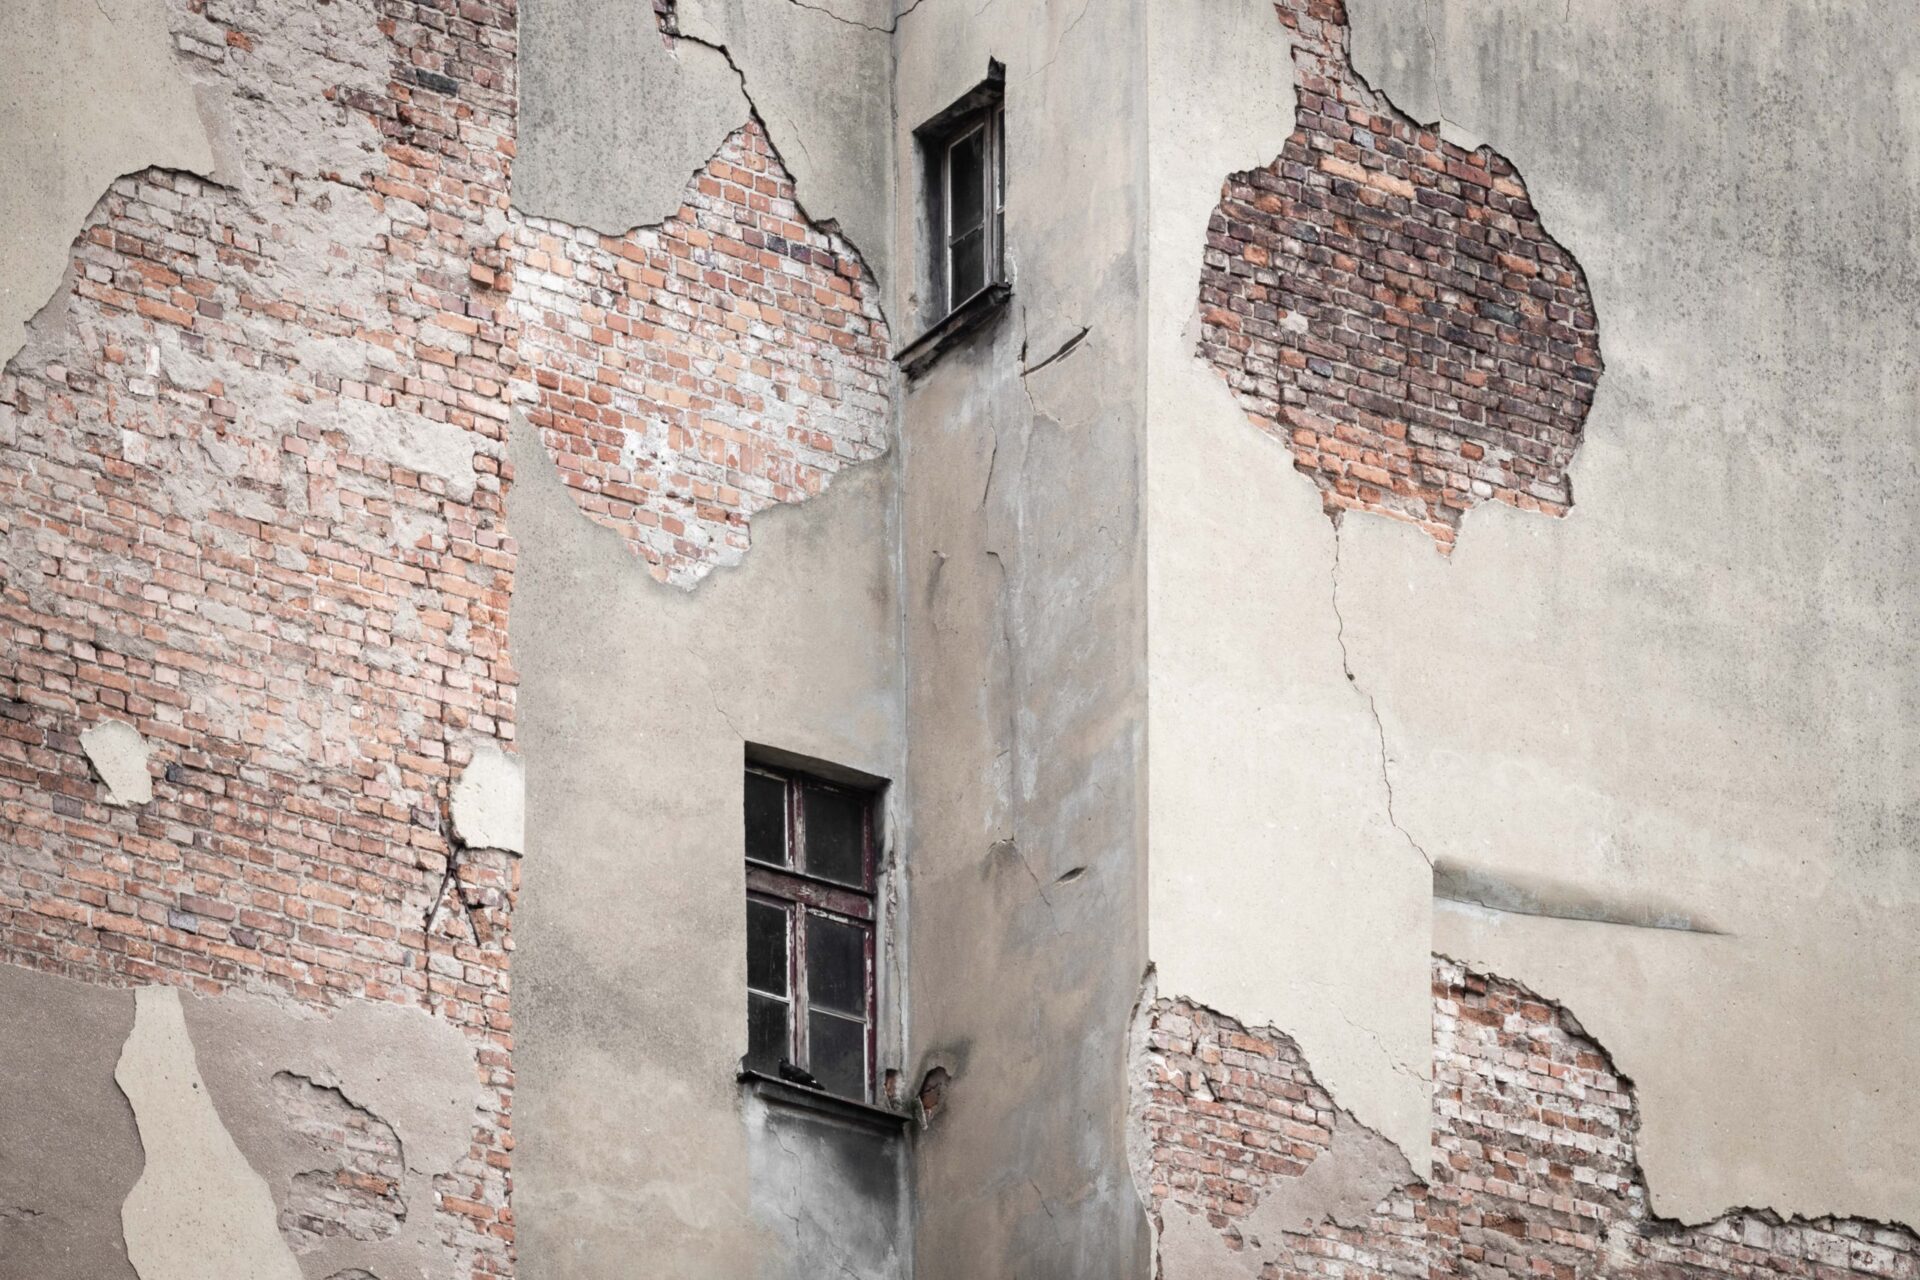 5 Common Problems With Building Facades And How To Avoid Them